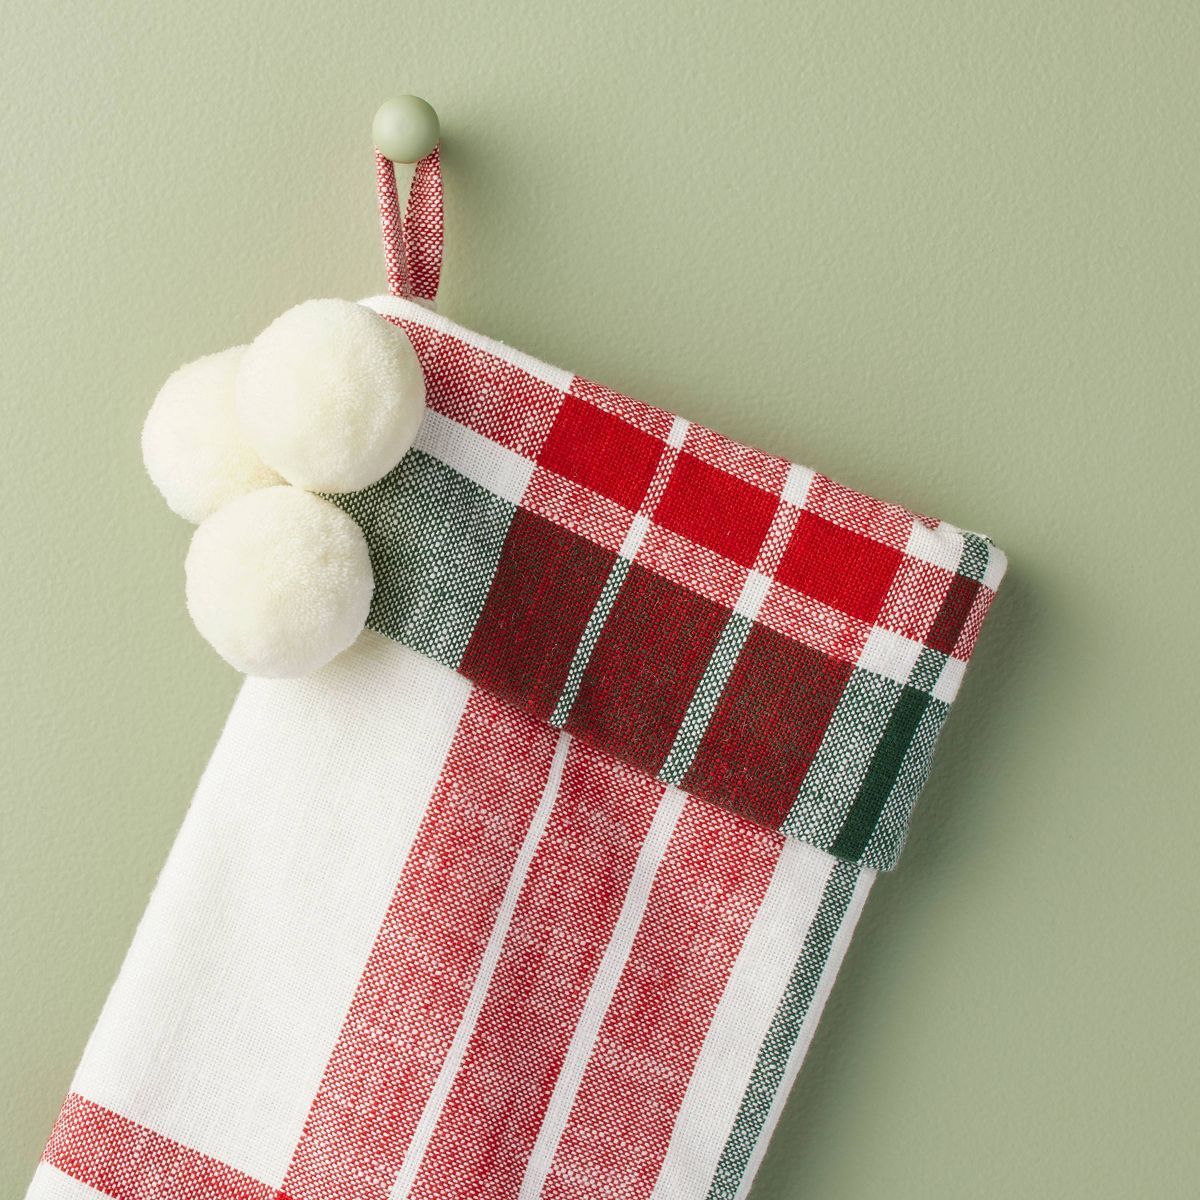 Festive Plaid Christmas Stocking Red/Green/Cream - Hearth & Hand™ with Magnolia | Target